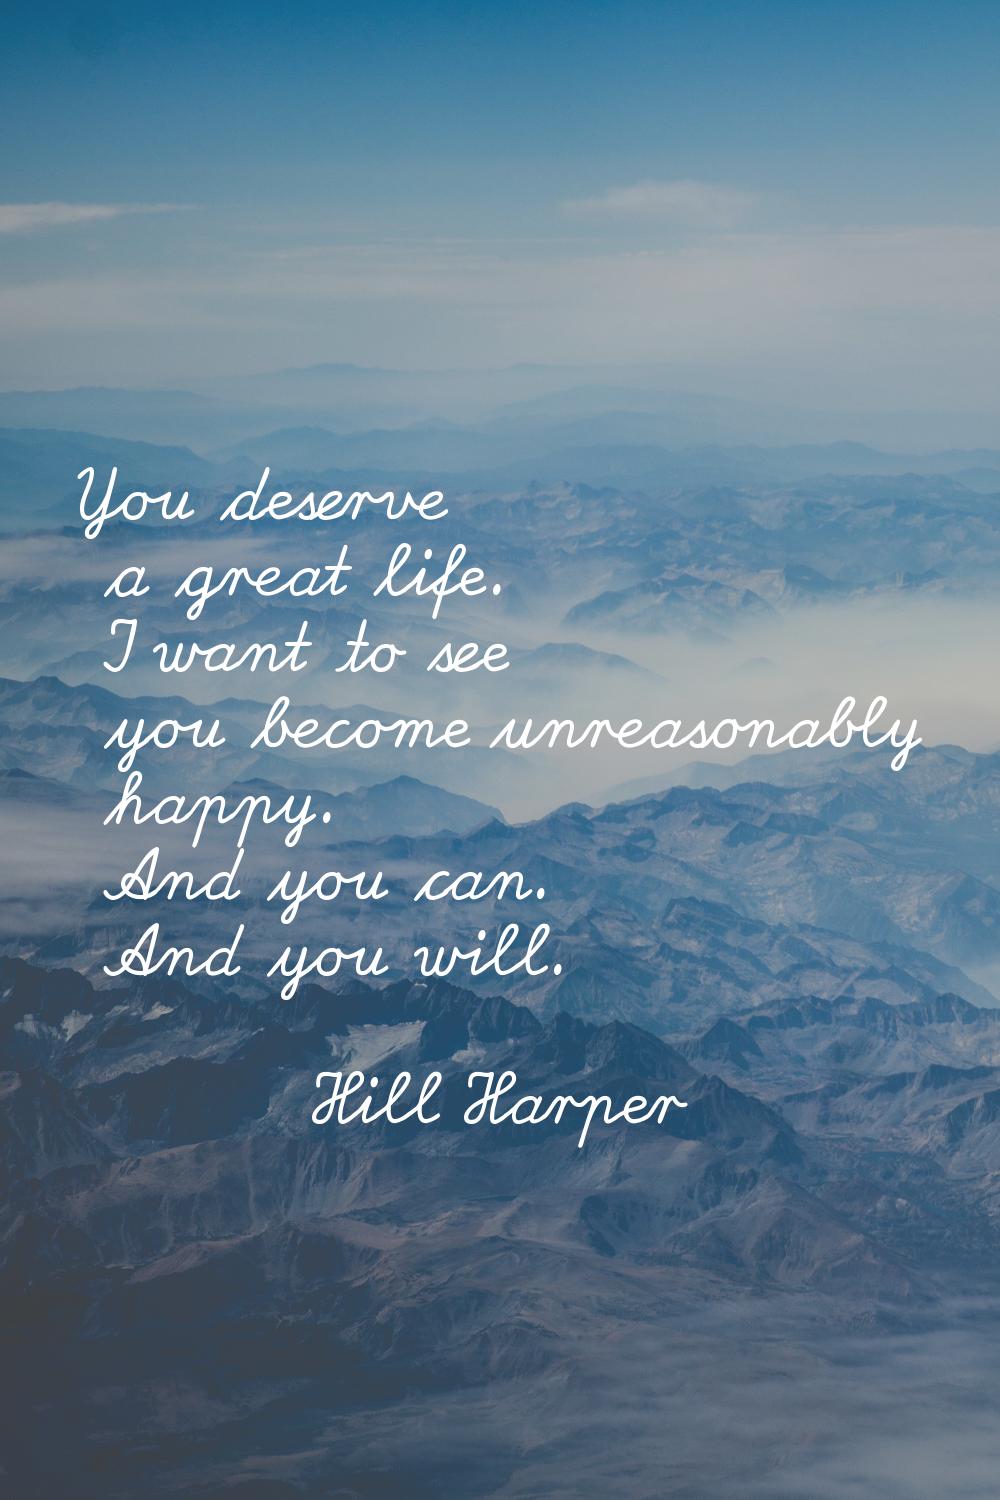 You deserve a great life. I want to see you become unreasonably happy. And you can. And you will.